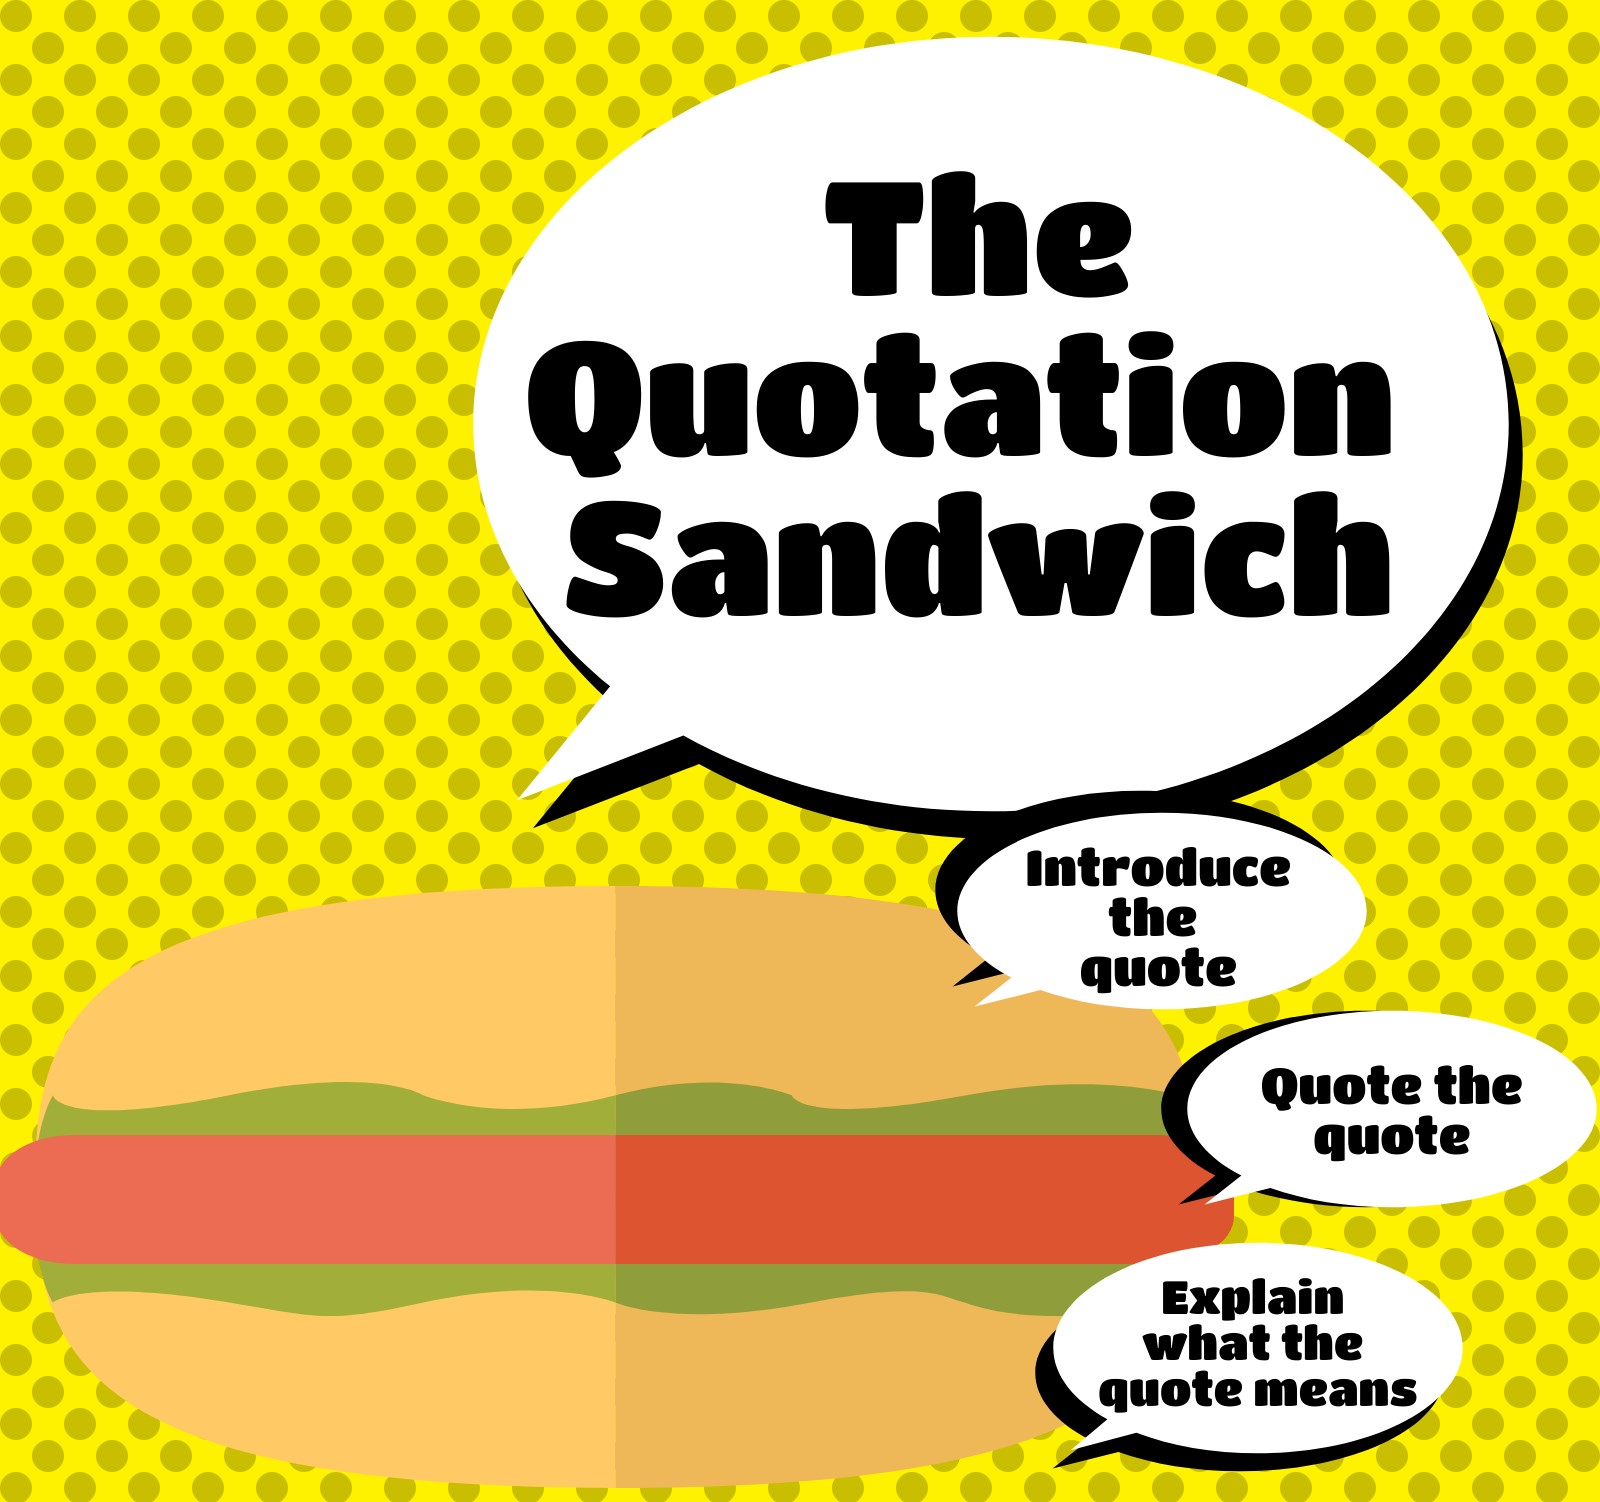 A graphic shows a sub sandwich with four text boxes around it saying, "The quotation sandwich," "Introduce the quote," "Quote the quote," "Explain what the quote means"